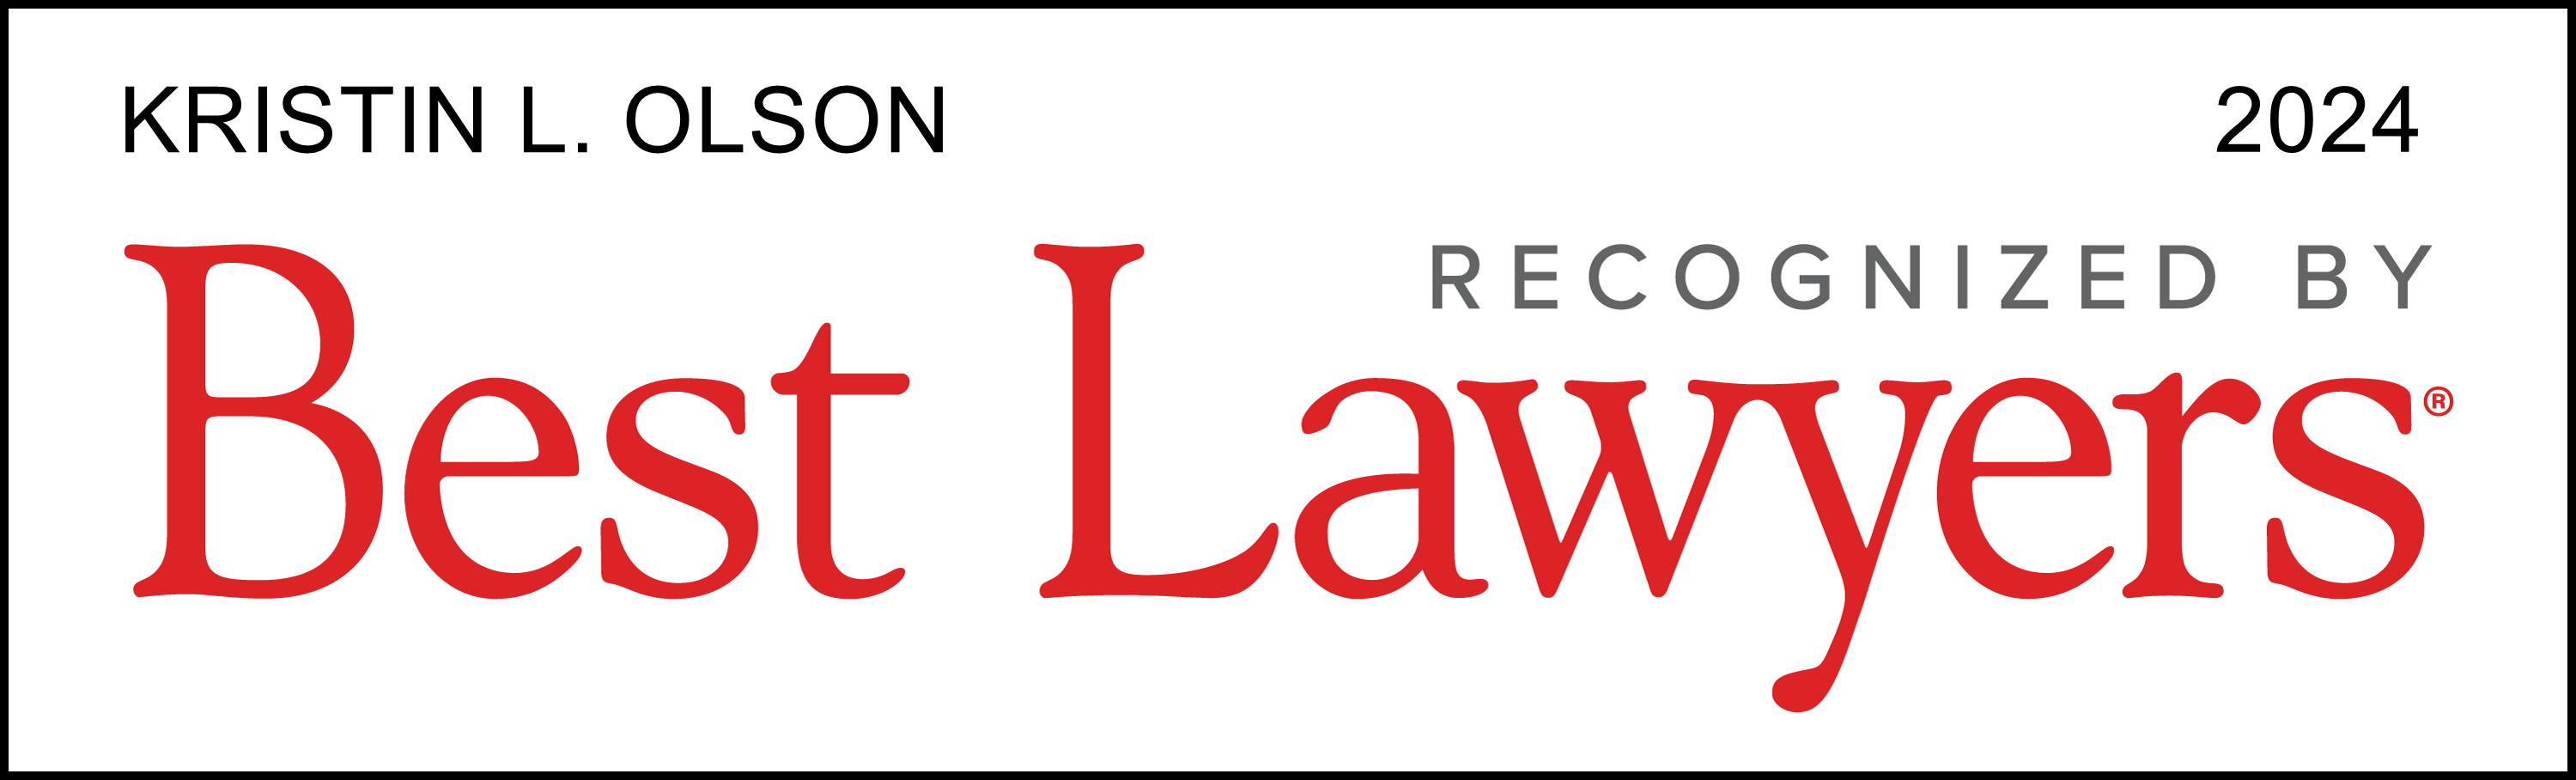 Kristin Olson has been recognized by Best Lawyers